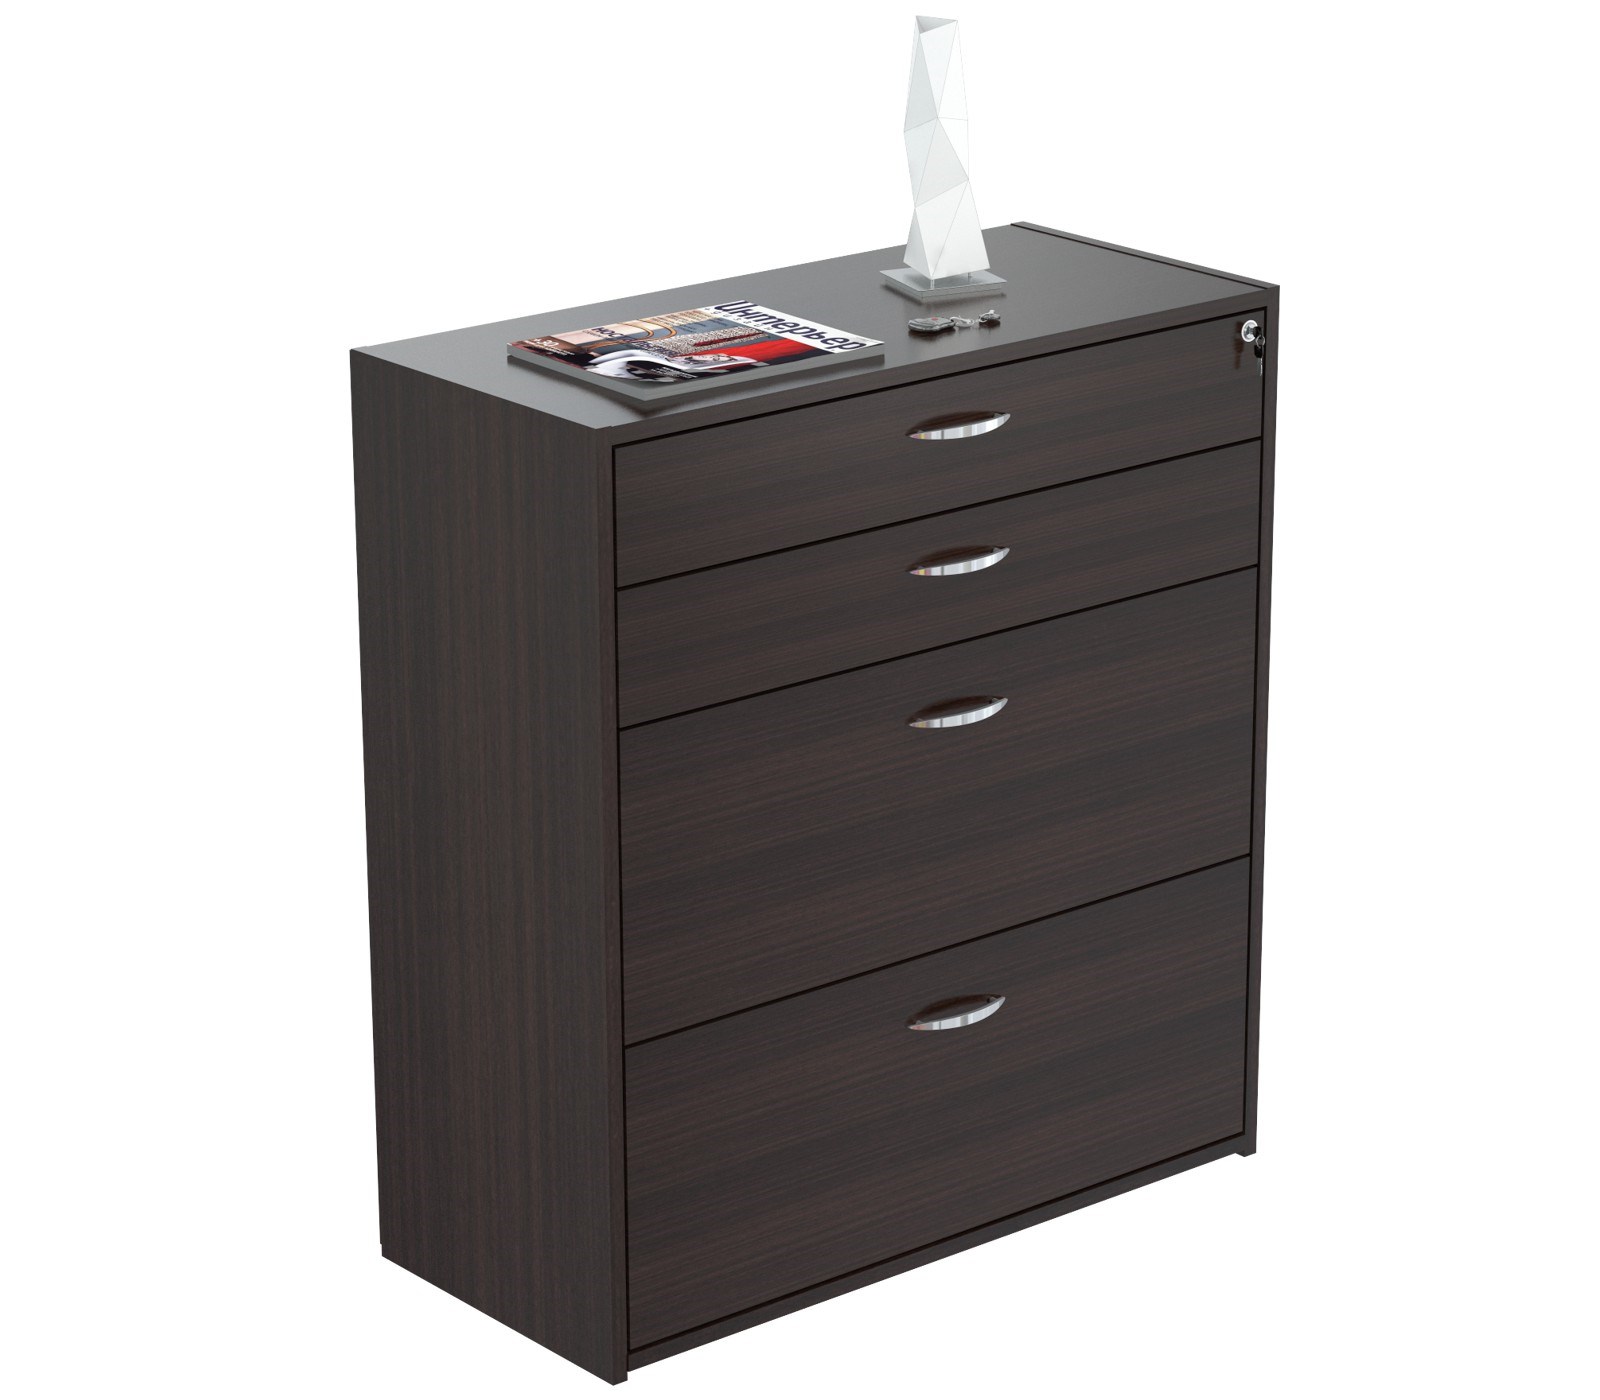 38.7" Espresso Melamine and Engineered Wood Filing Cabinet with 4 Drawers